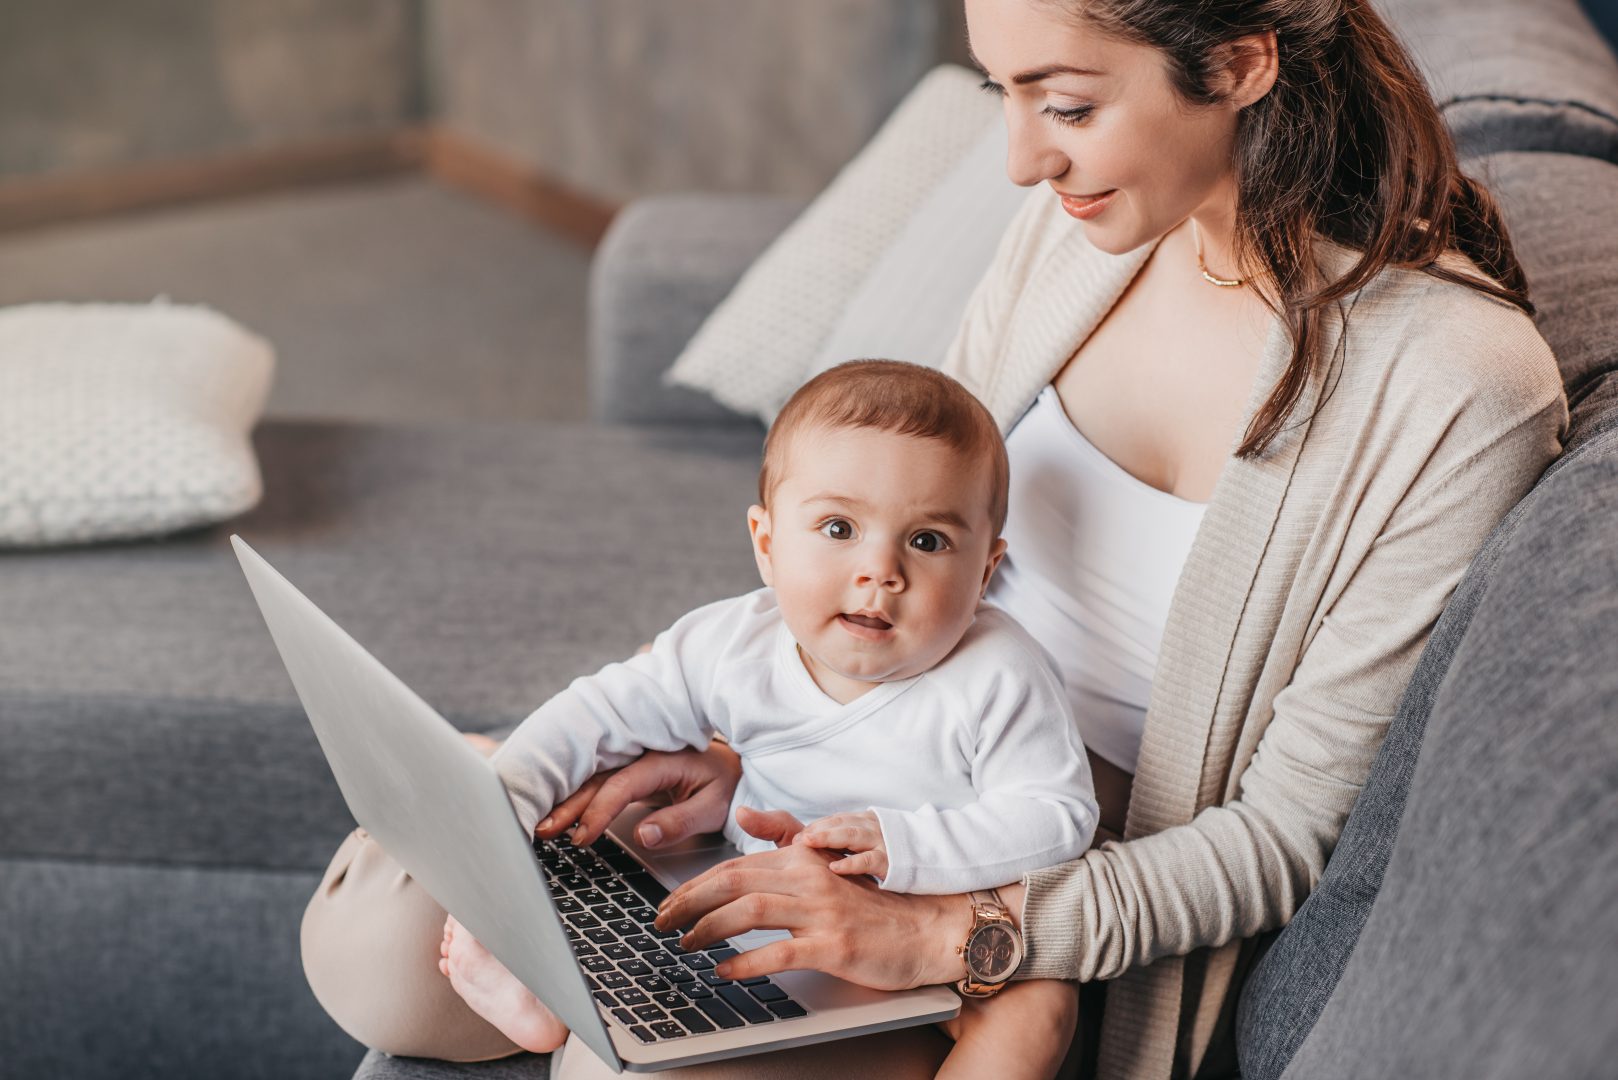 young mother using TeamViewer Remote Access to work from home and attend online meeting while taking care of baby